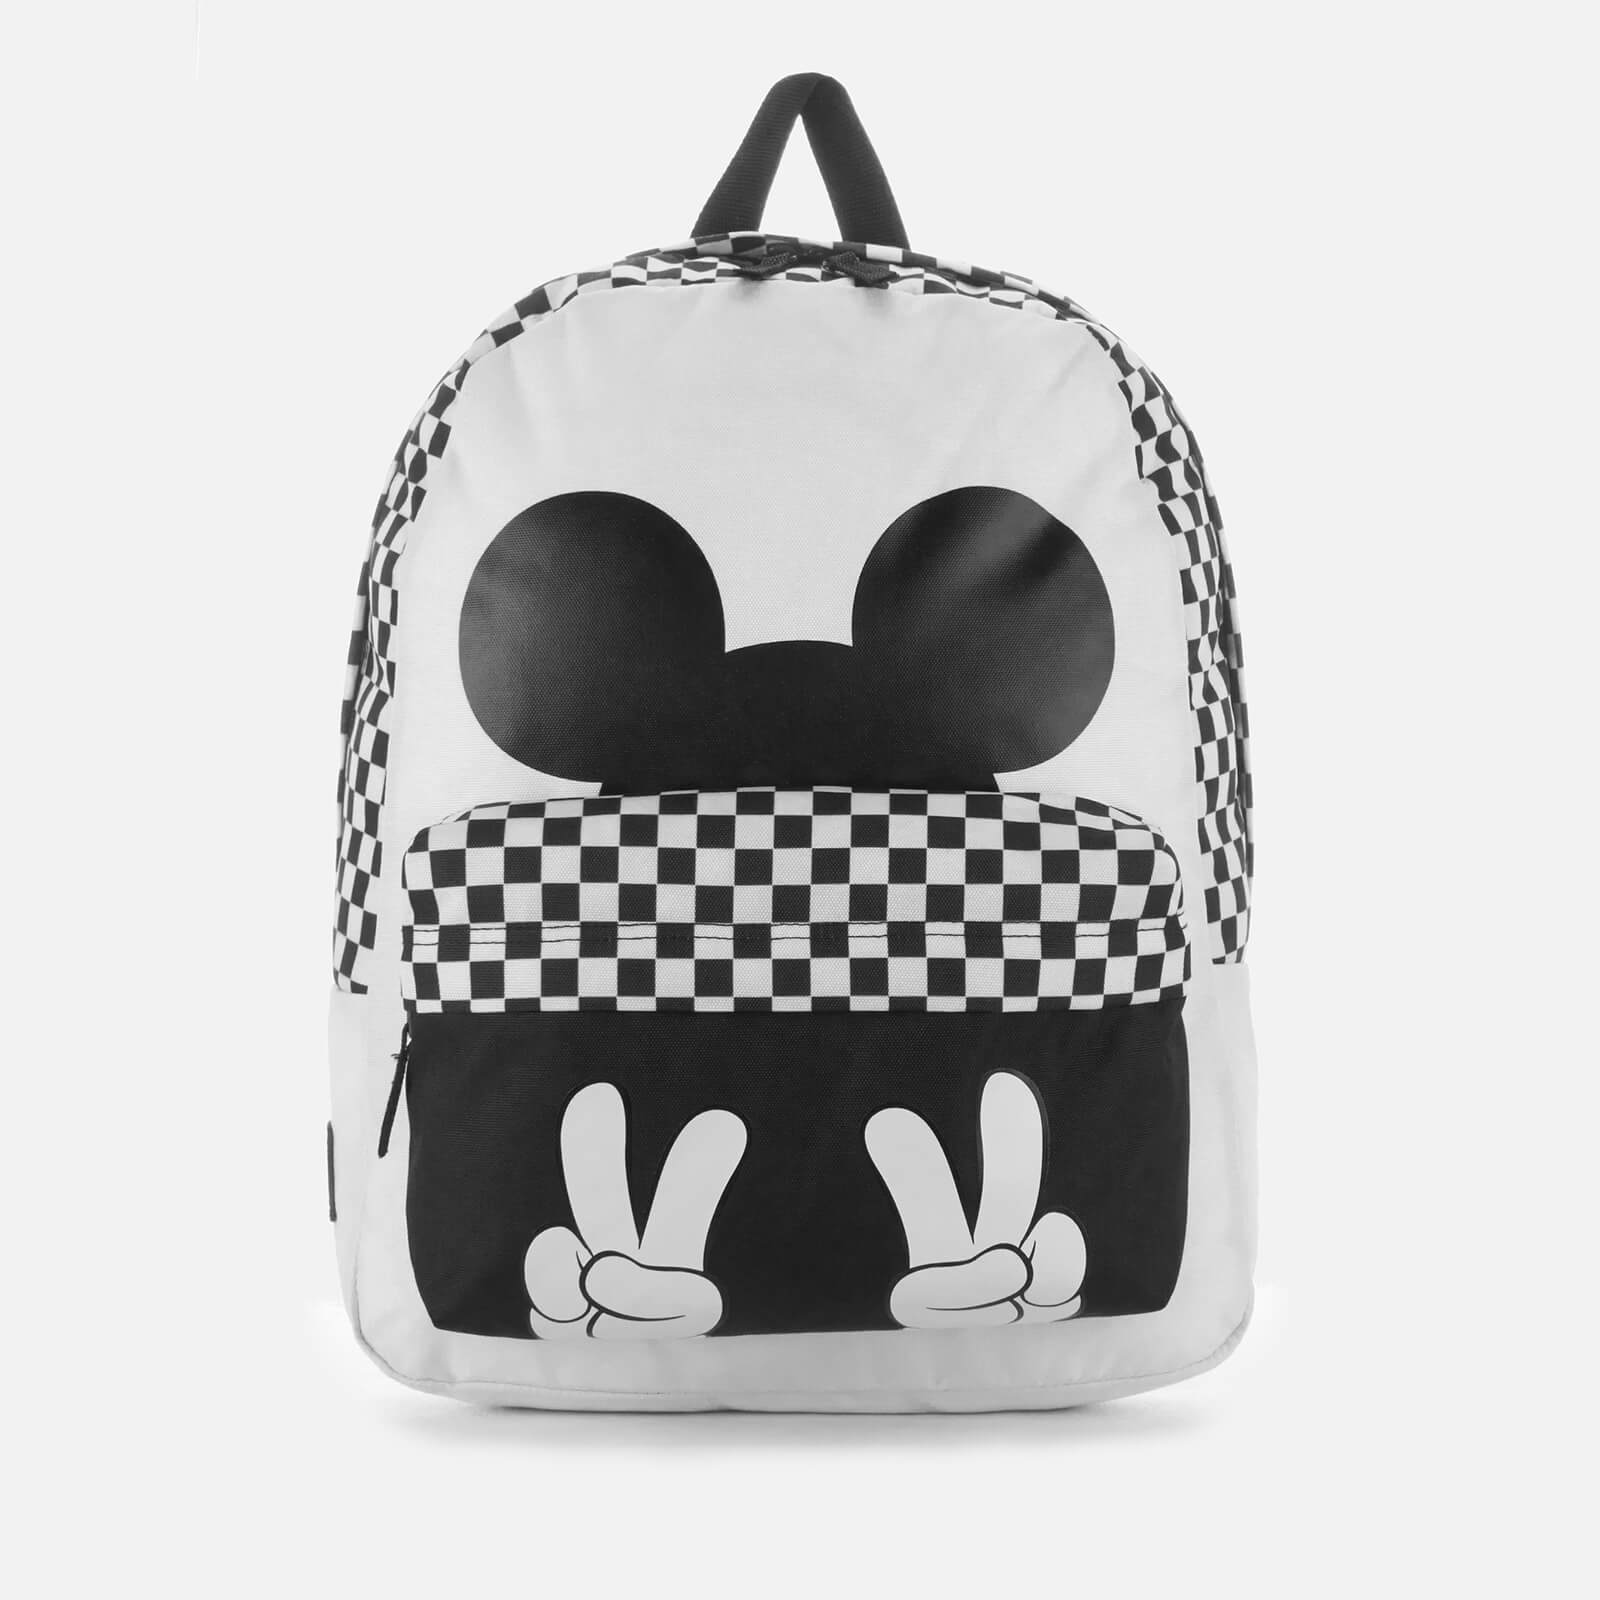 vans mickey mouse backpack uk